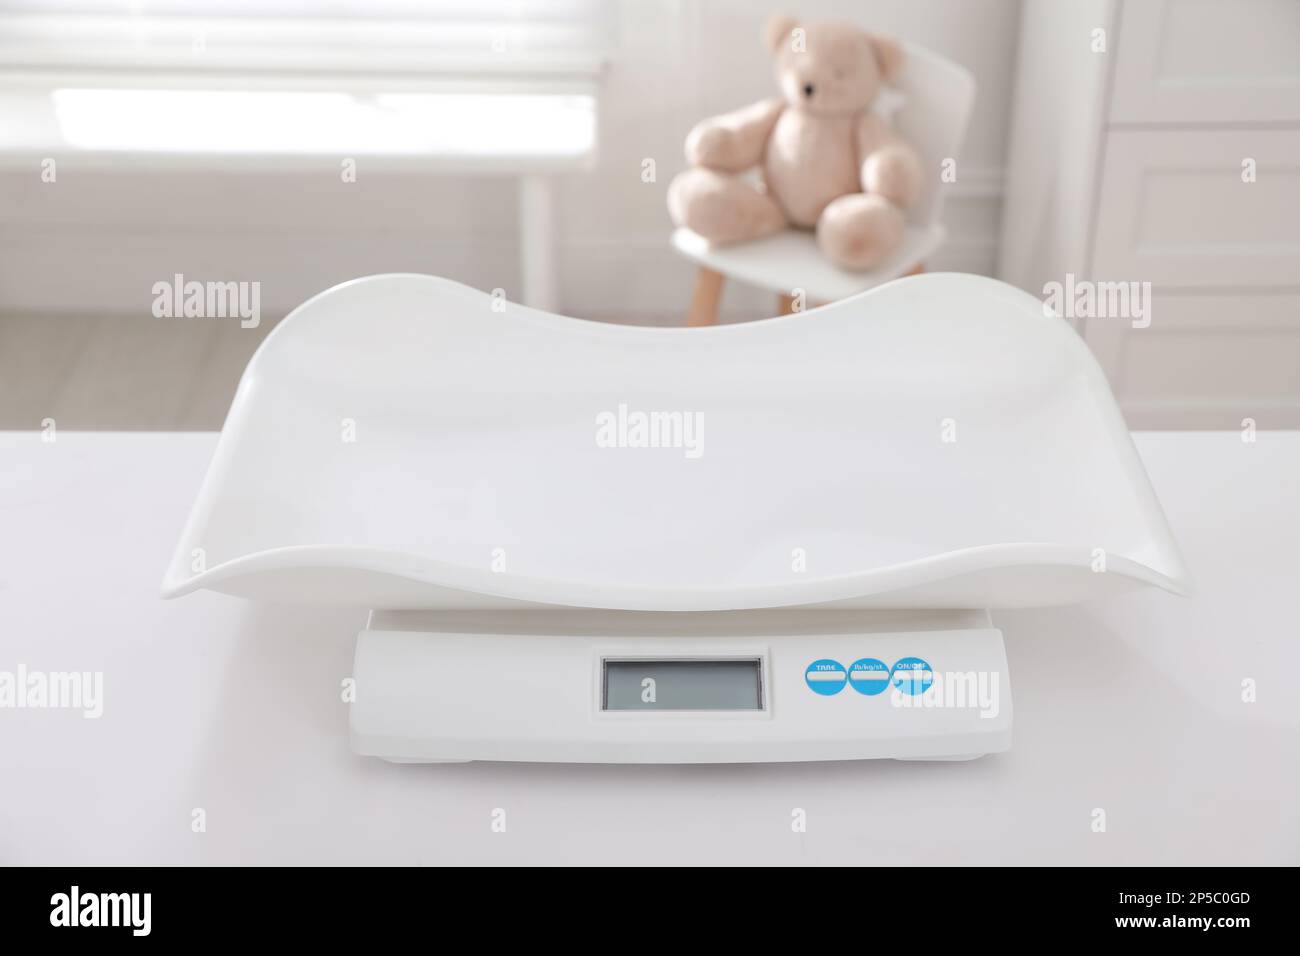 https://c8.alamy.com/comp/2P5C0GD/modern-digital-baby-scales-on-table-in-room-2P5C0GD.jpg